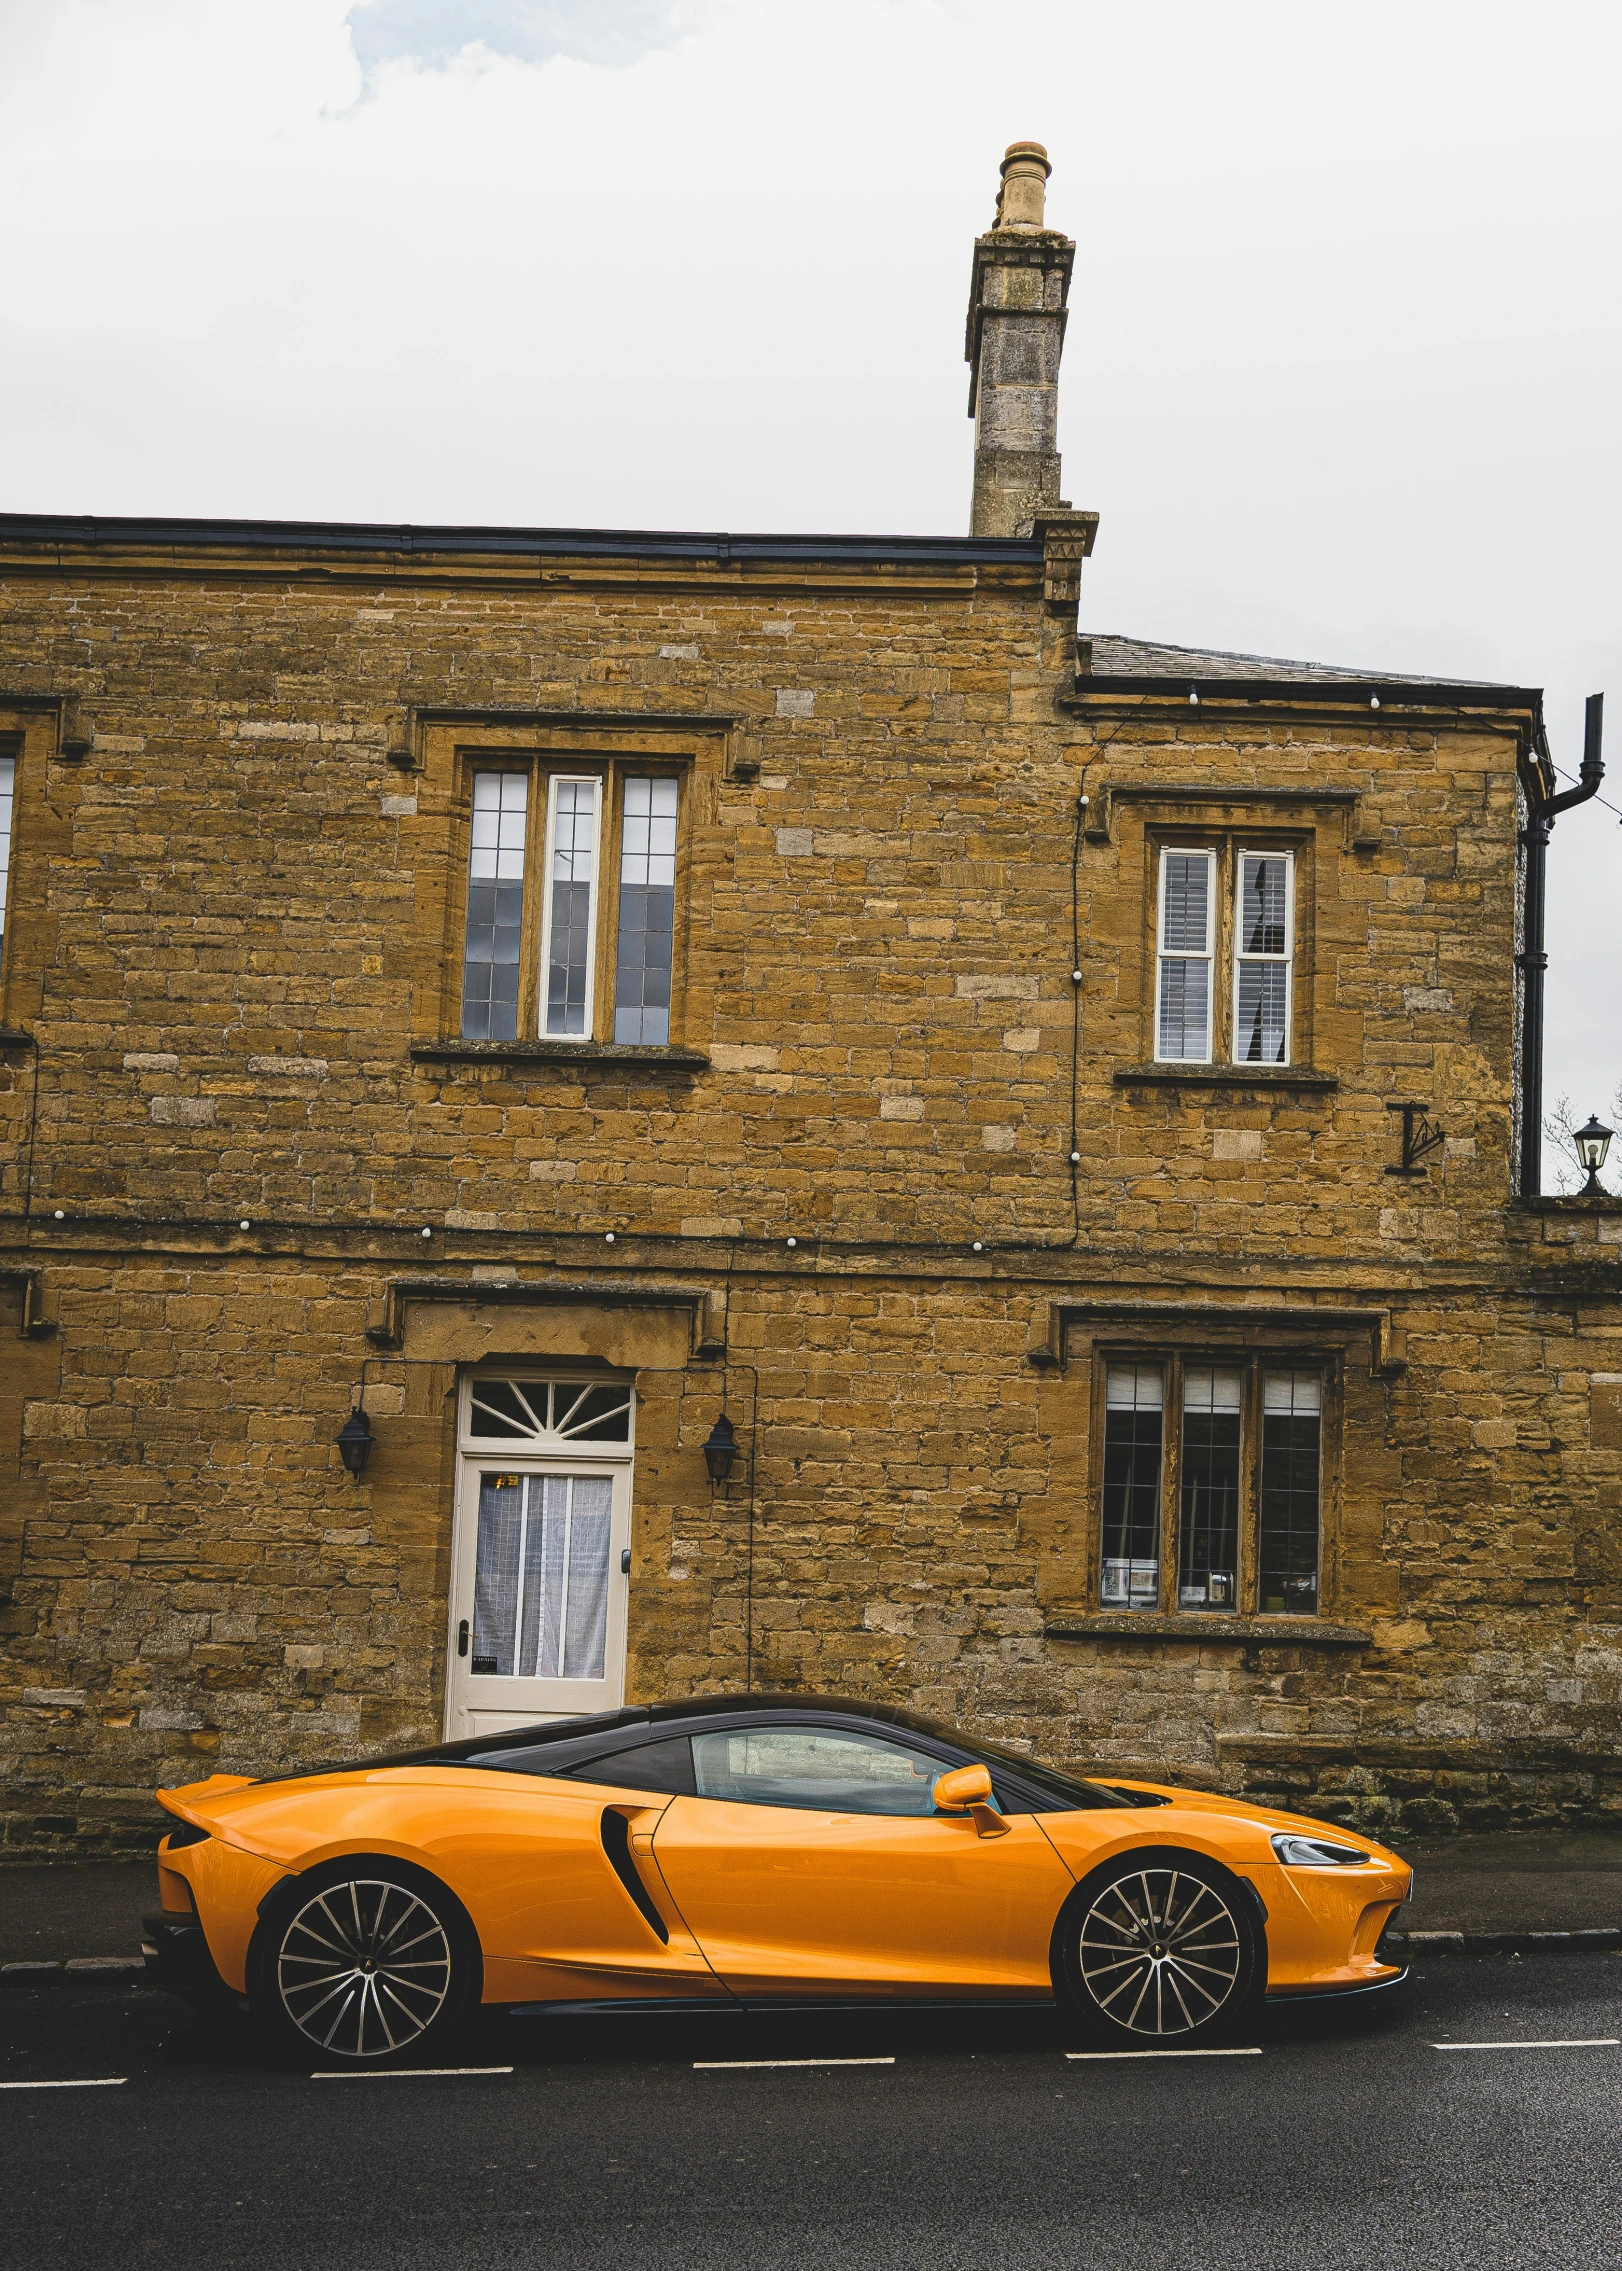 a very nice bright colored sports car parked in front of a house